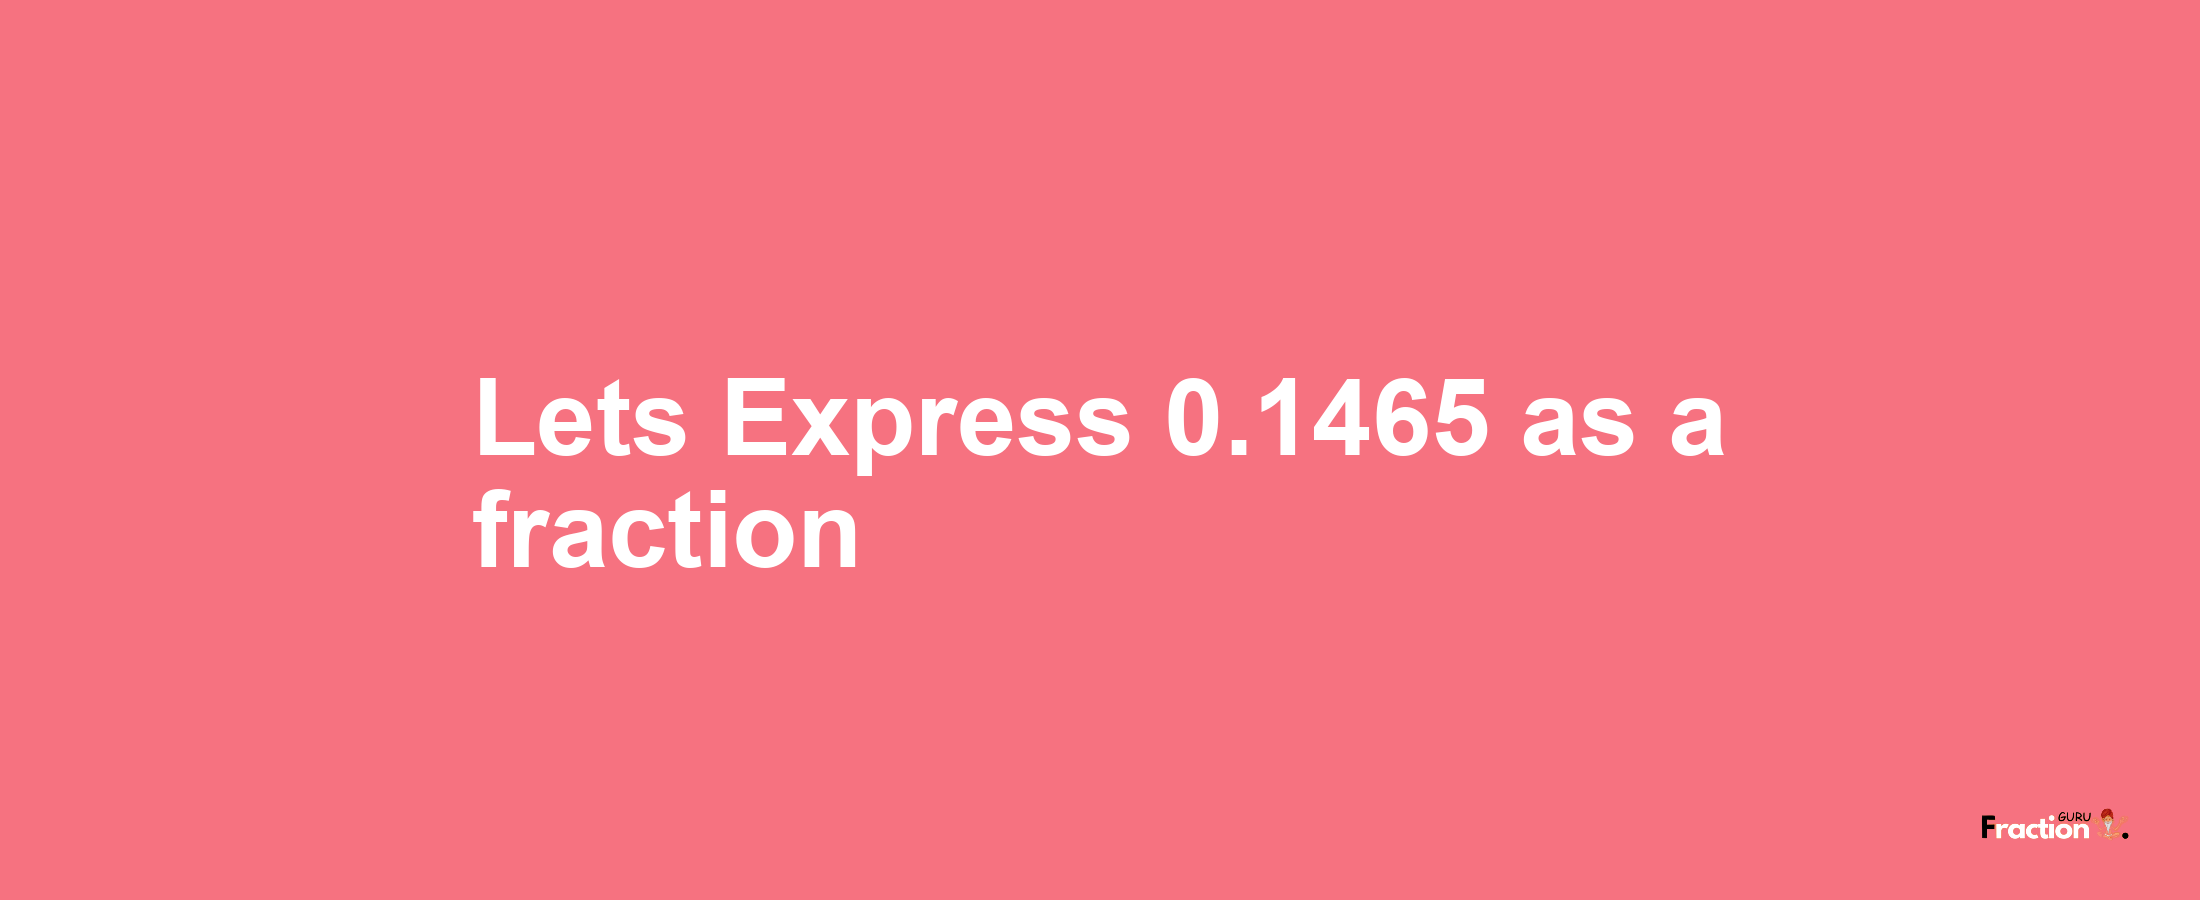 Lets Express 0.1465 as afraction